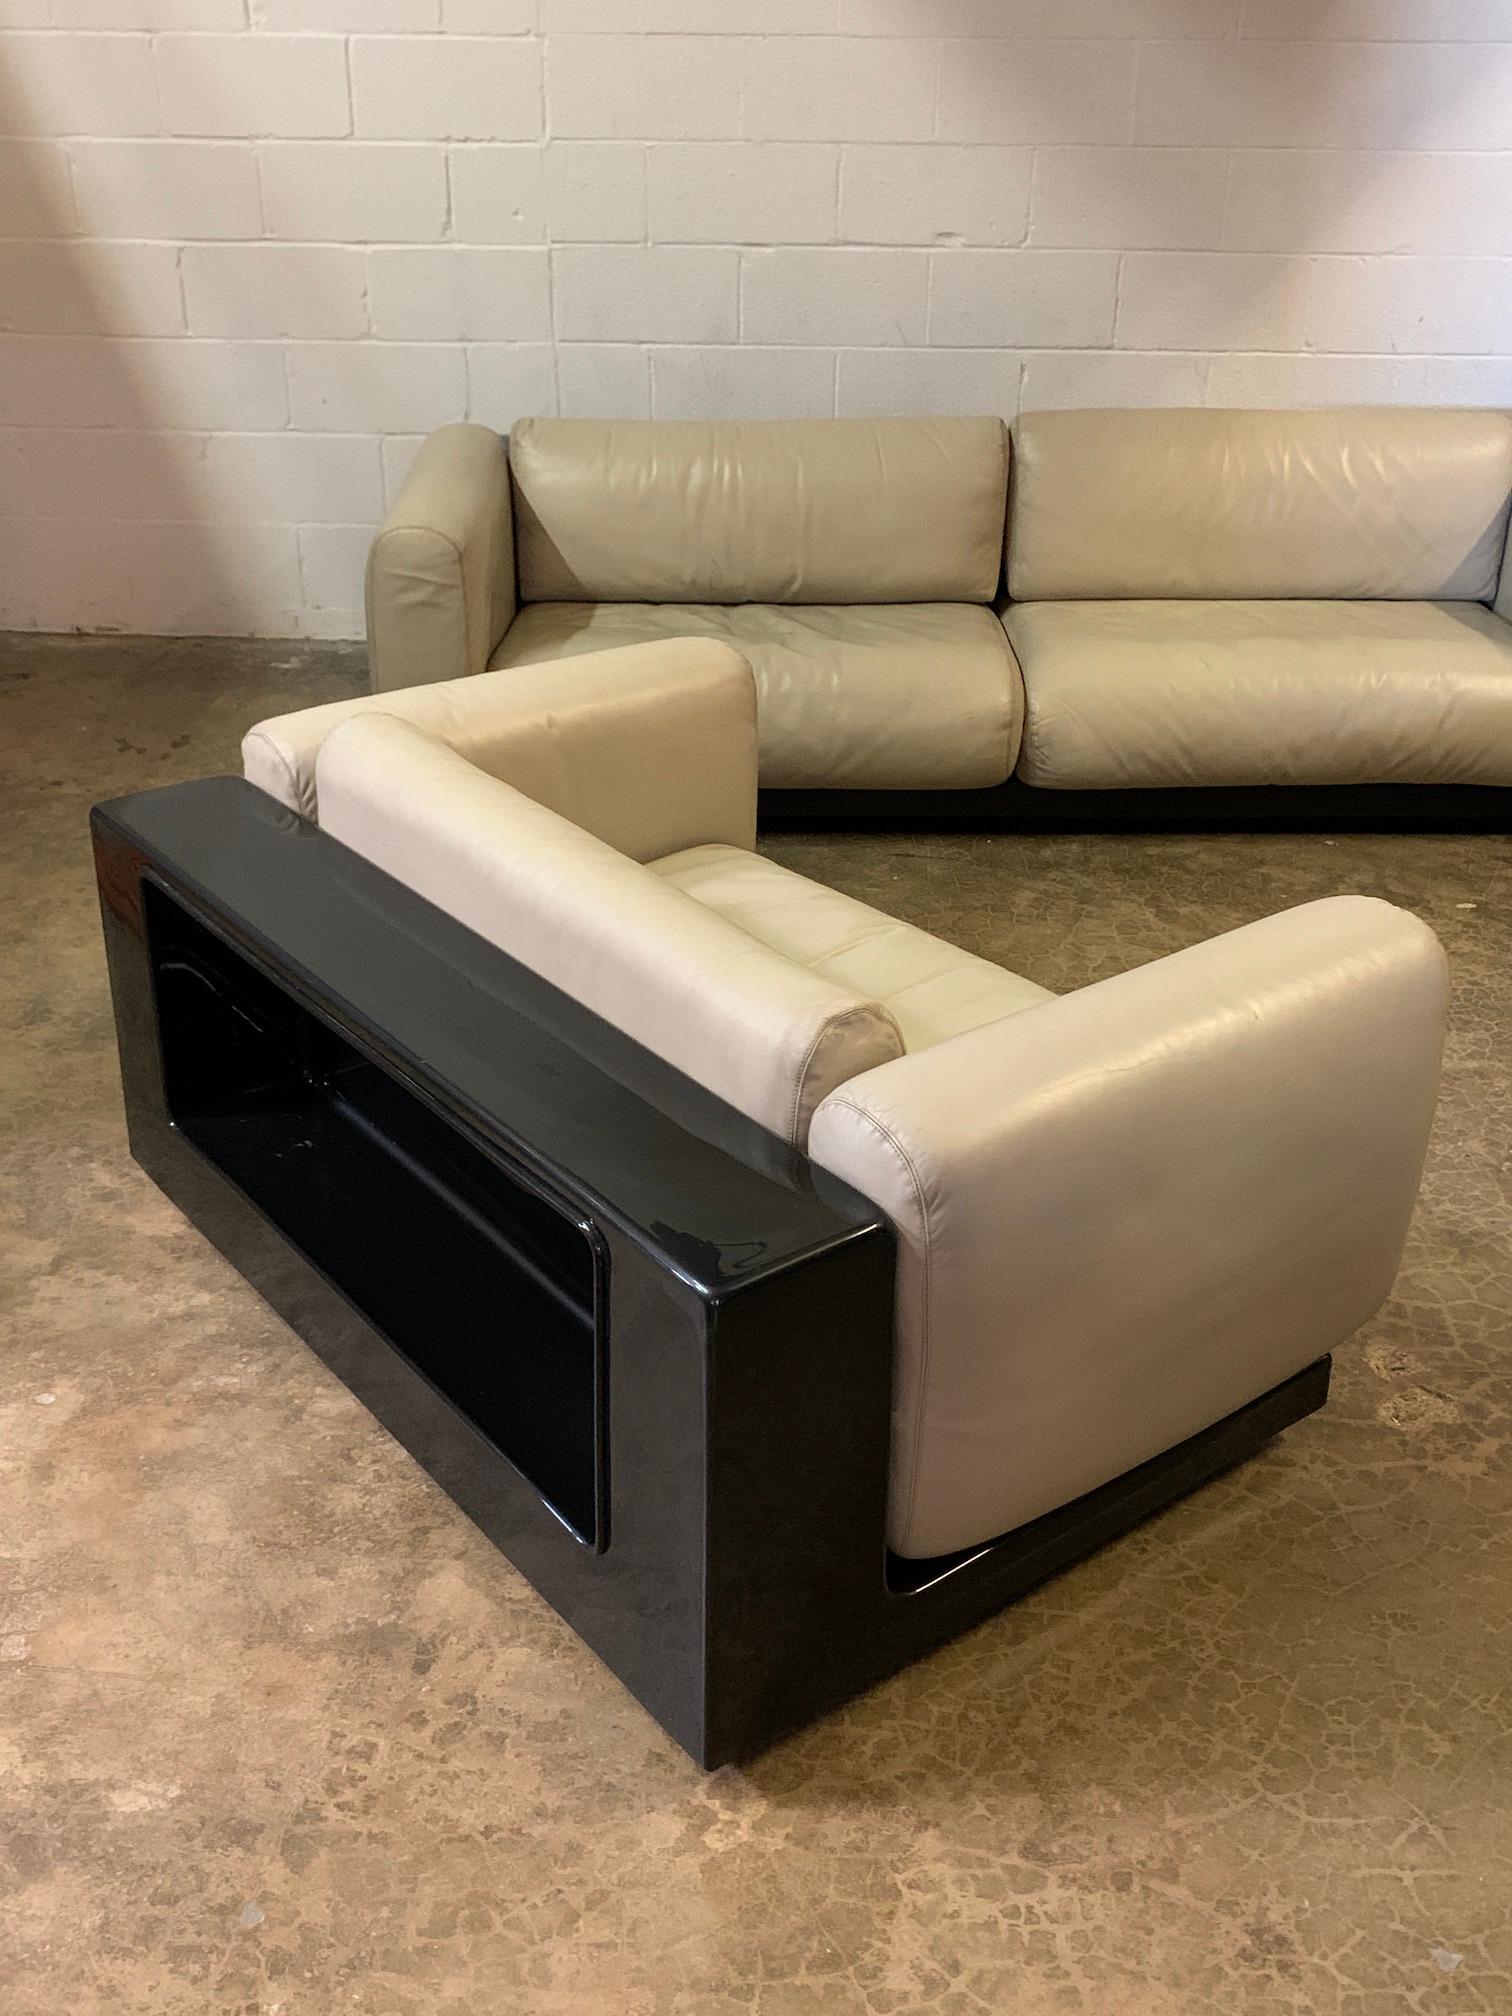 Part of the 'Gradual' seating system designed by Cici Boeri and sold through Gavina / Knoll in 1971. This settee has a dark brown fiberglass frame with intergraded shelf and casters. The original cream colored leather is supple and has a nice even